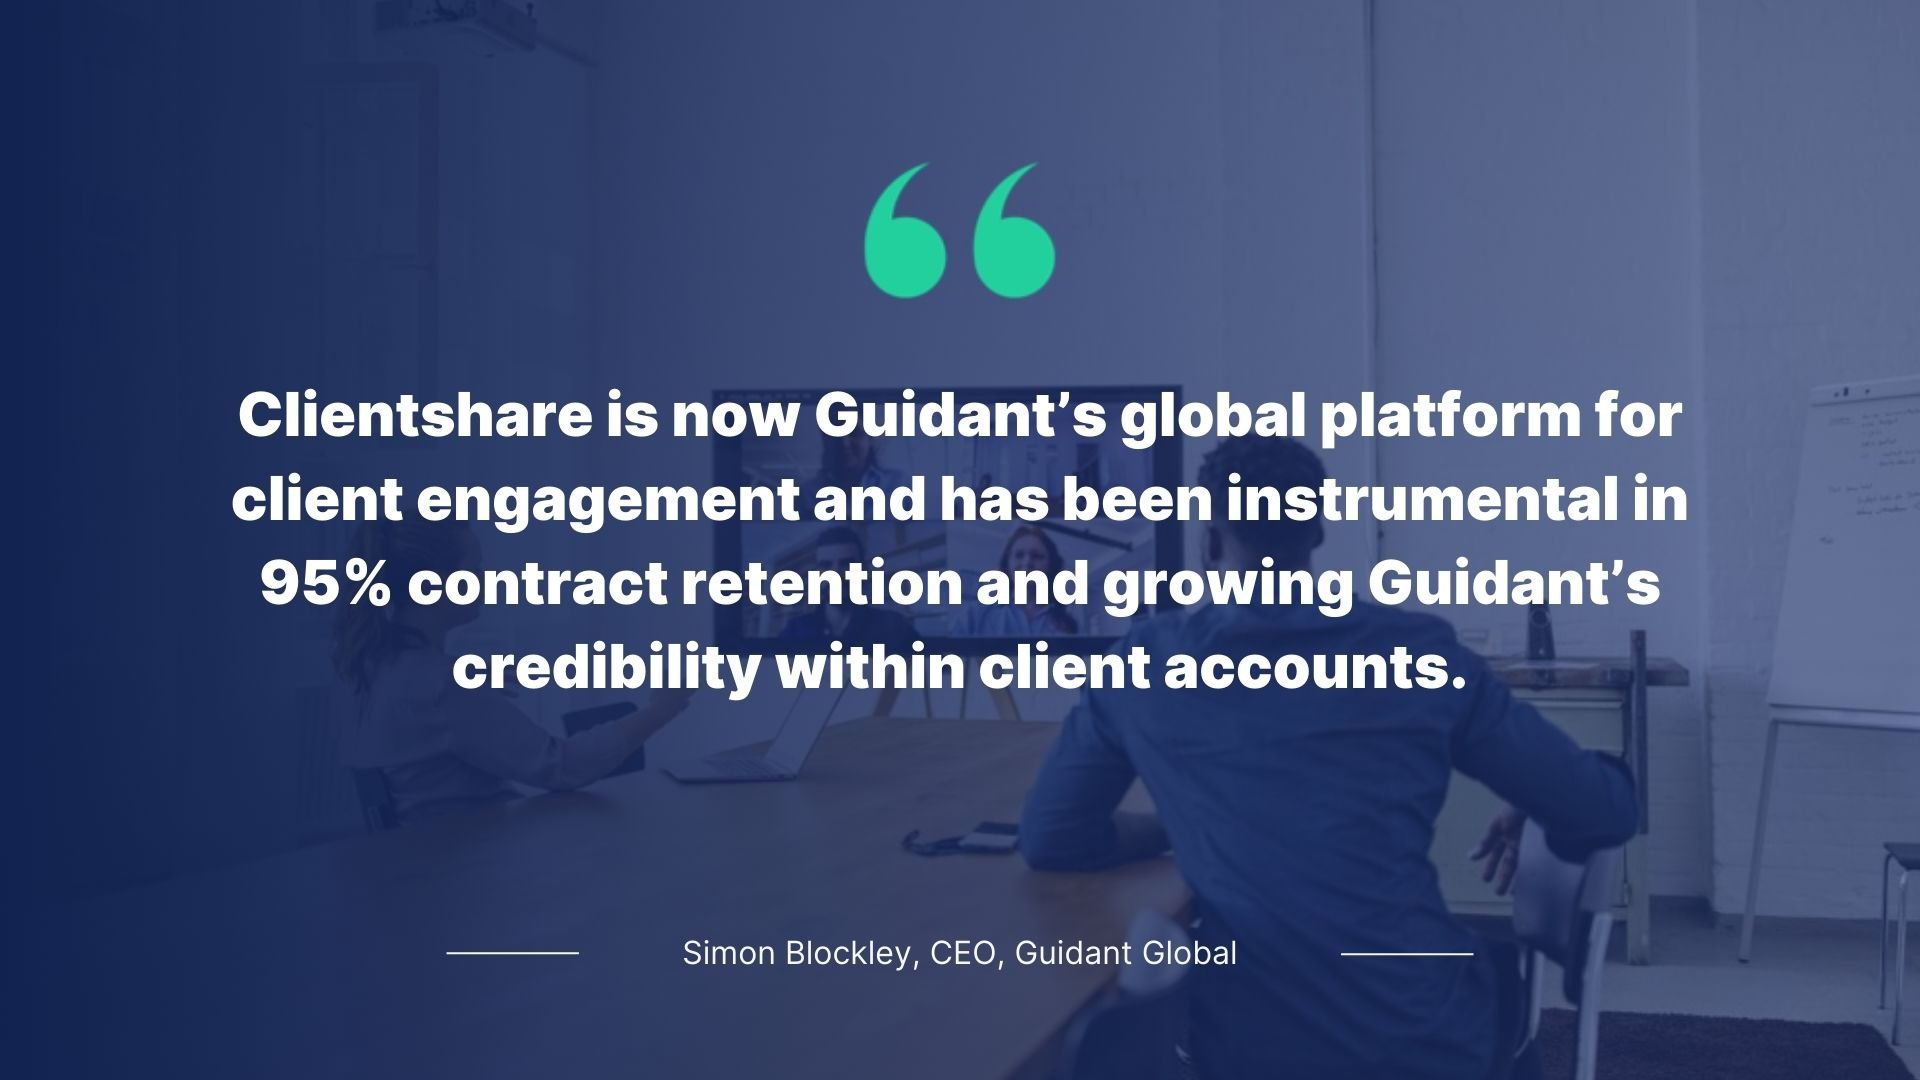 Quote by Simon Blockley, CEO, Guidant Global: Clientshare is now Guidant's global platform for client engagement ad has been instrumental in 95% contract retention and growing Guidant's credibility within client accounts.